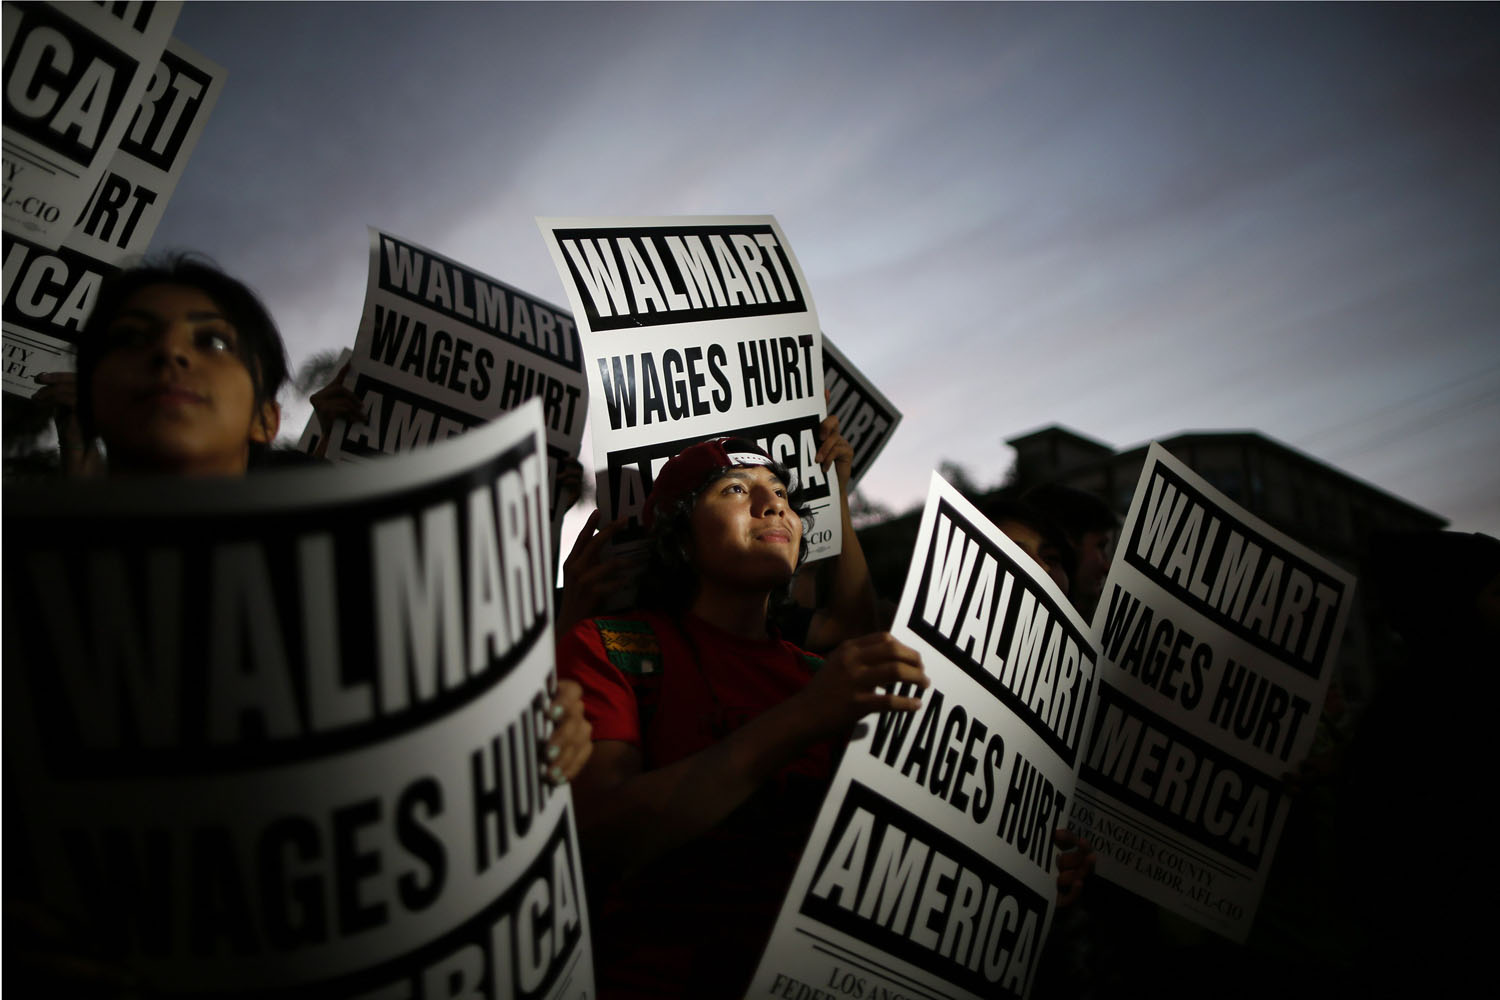 Pedro Taverna takes part in a protest for better wages at which 54 people were arrested outside Wal-mart in Los Angeles